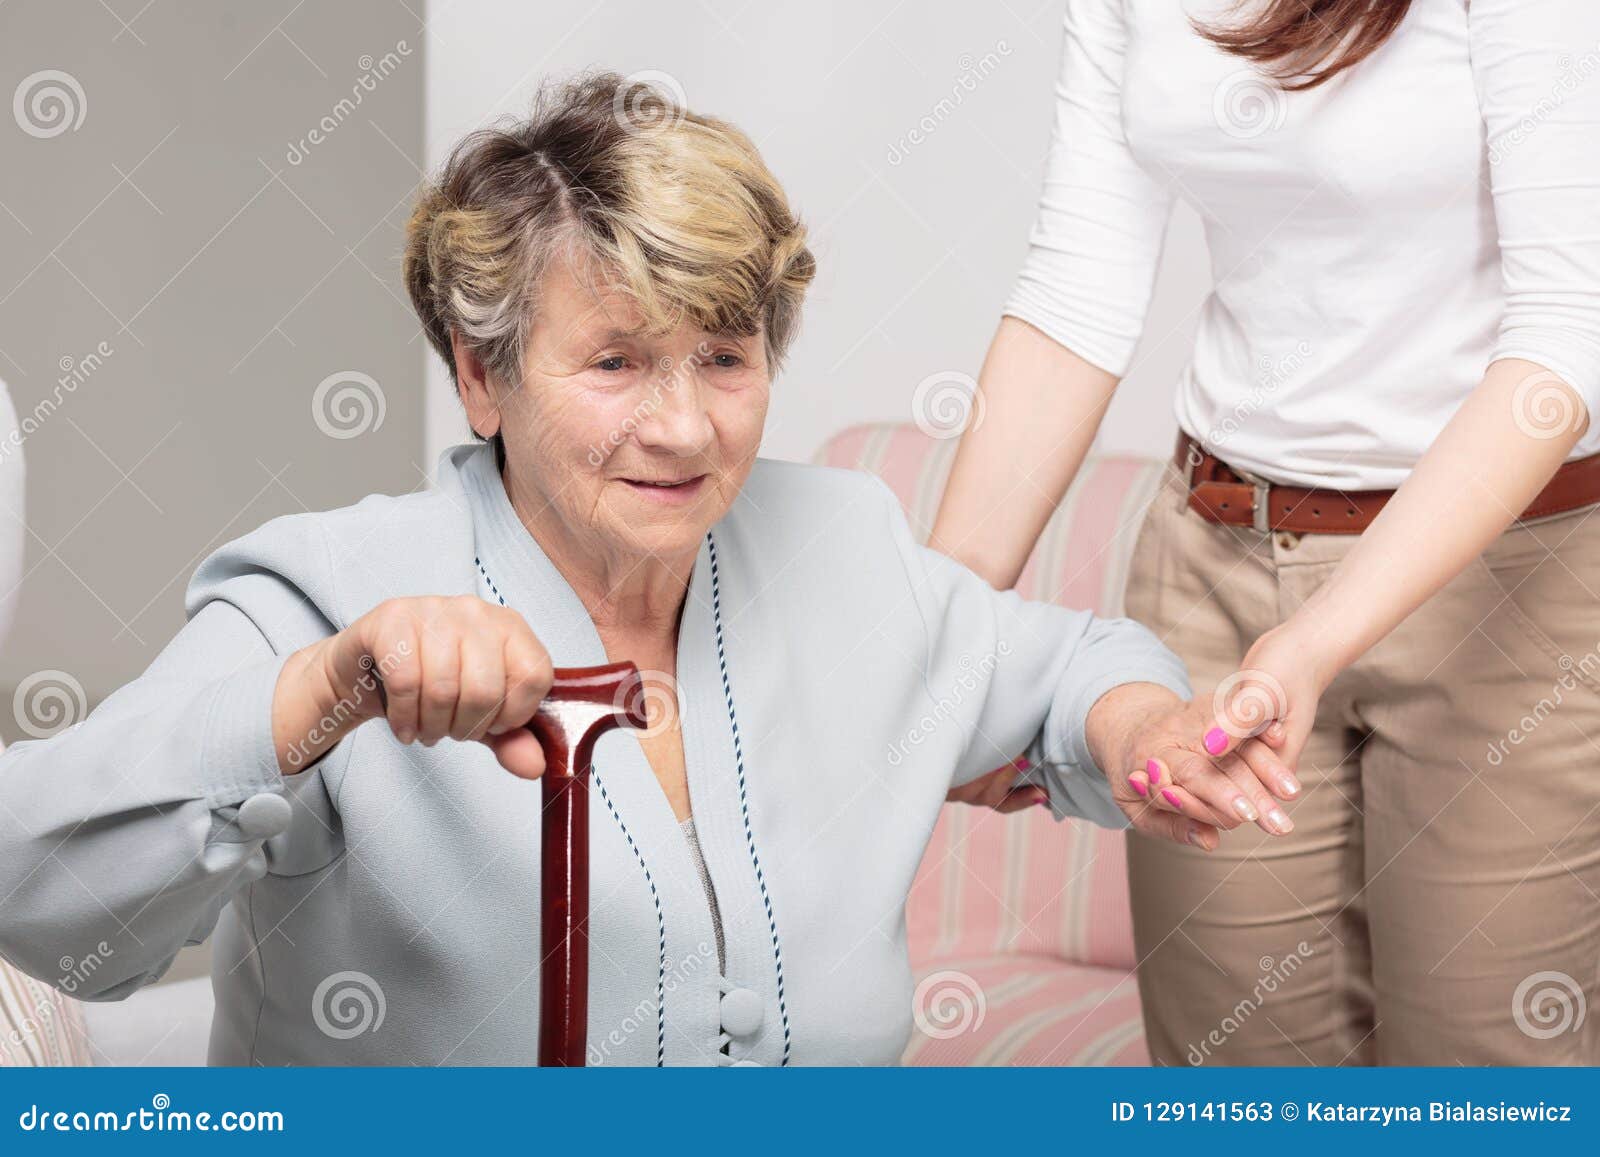 caregiver supporting senior woman with walking stick